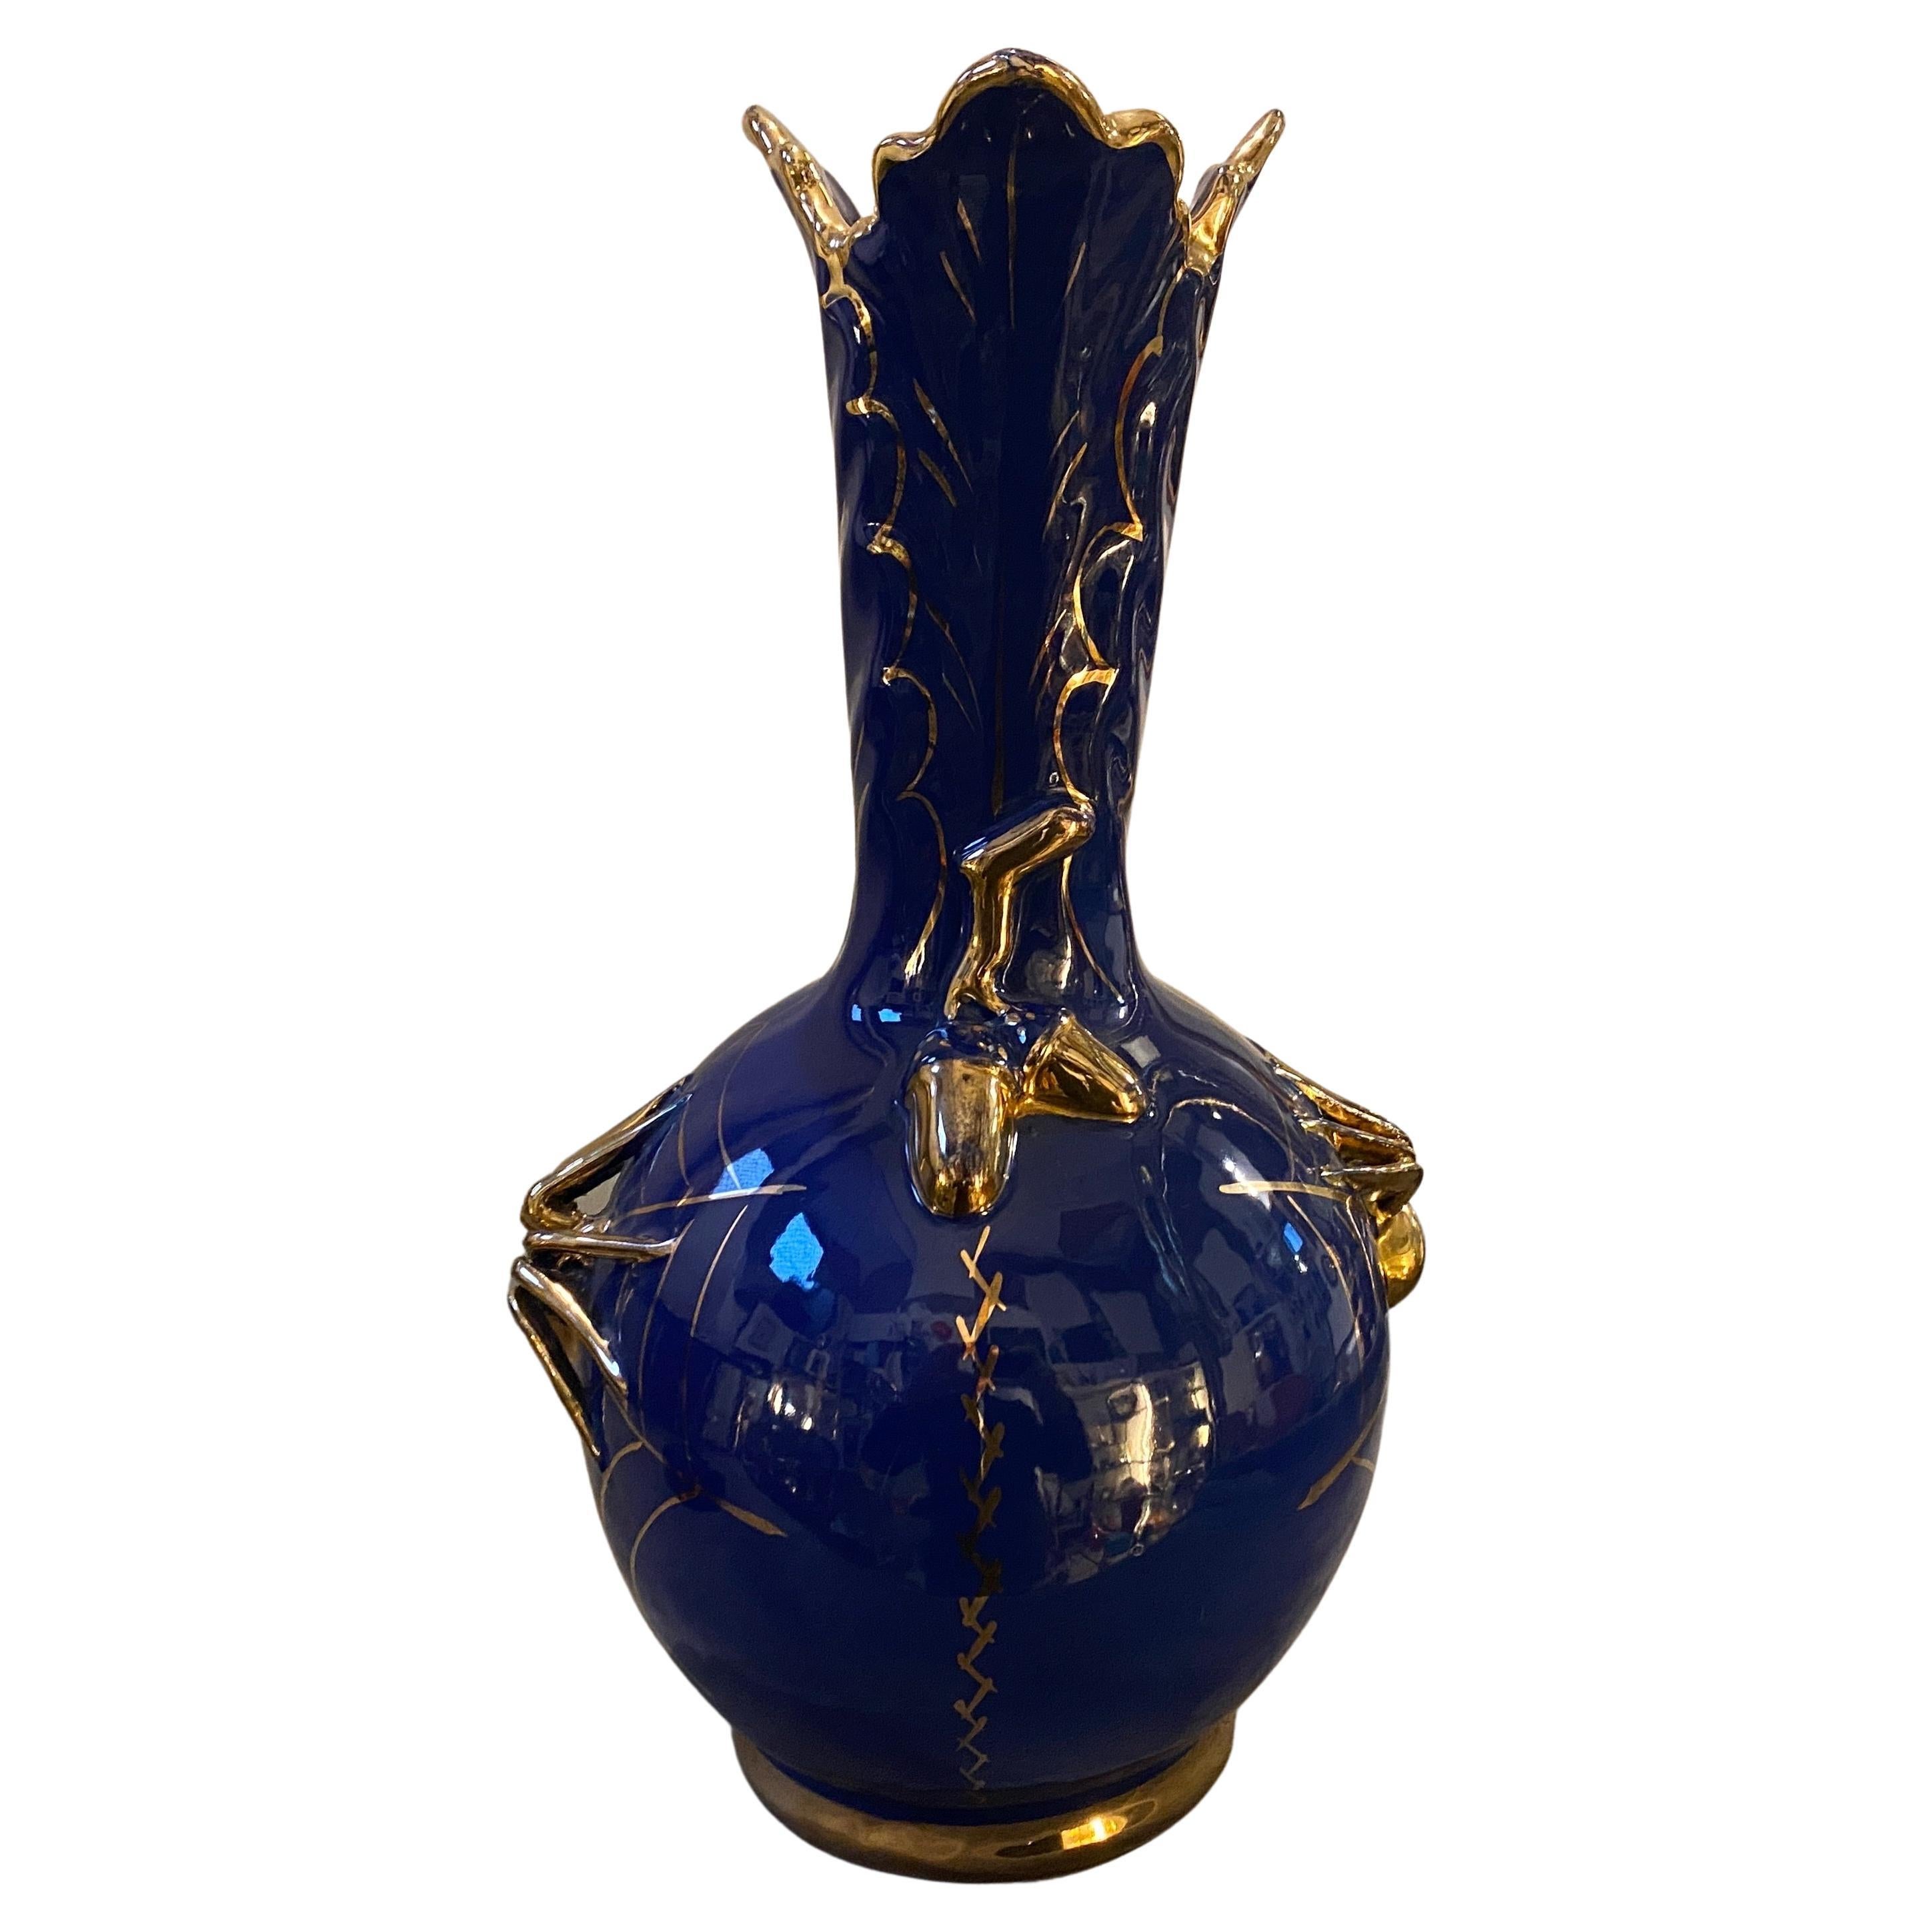 A mid-century modern blue and gold ceramic vase designed and manufactured in Gualdo Tadino, small town in Italy, famous for hand-crafted ceramics, by Nuova Mastro Giorgio in the Fifties. This Spider Vase is a captivating piece of art that